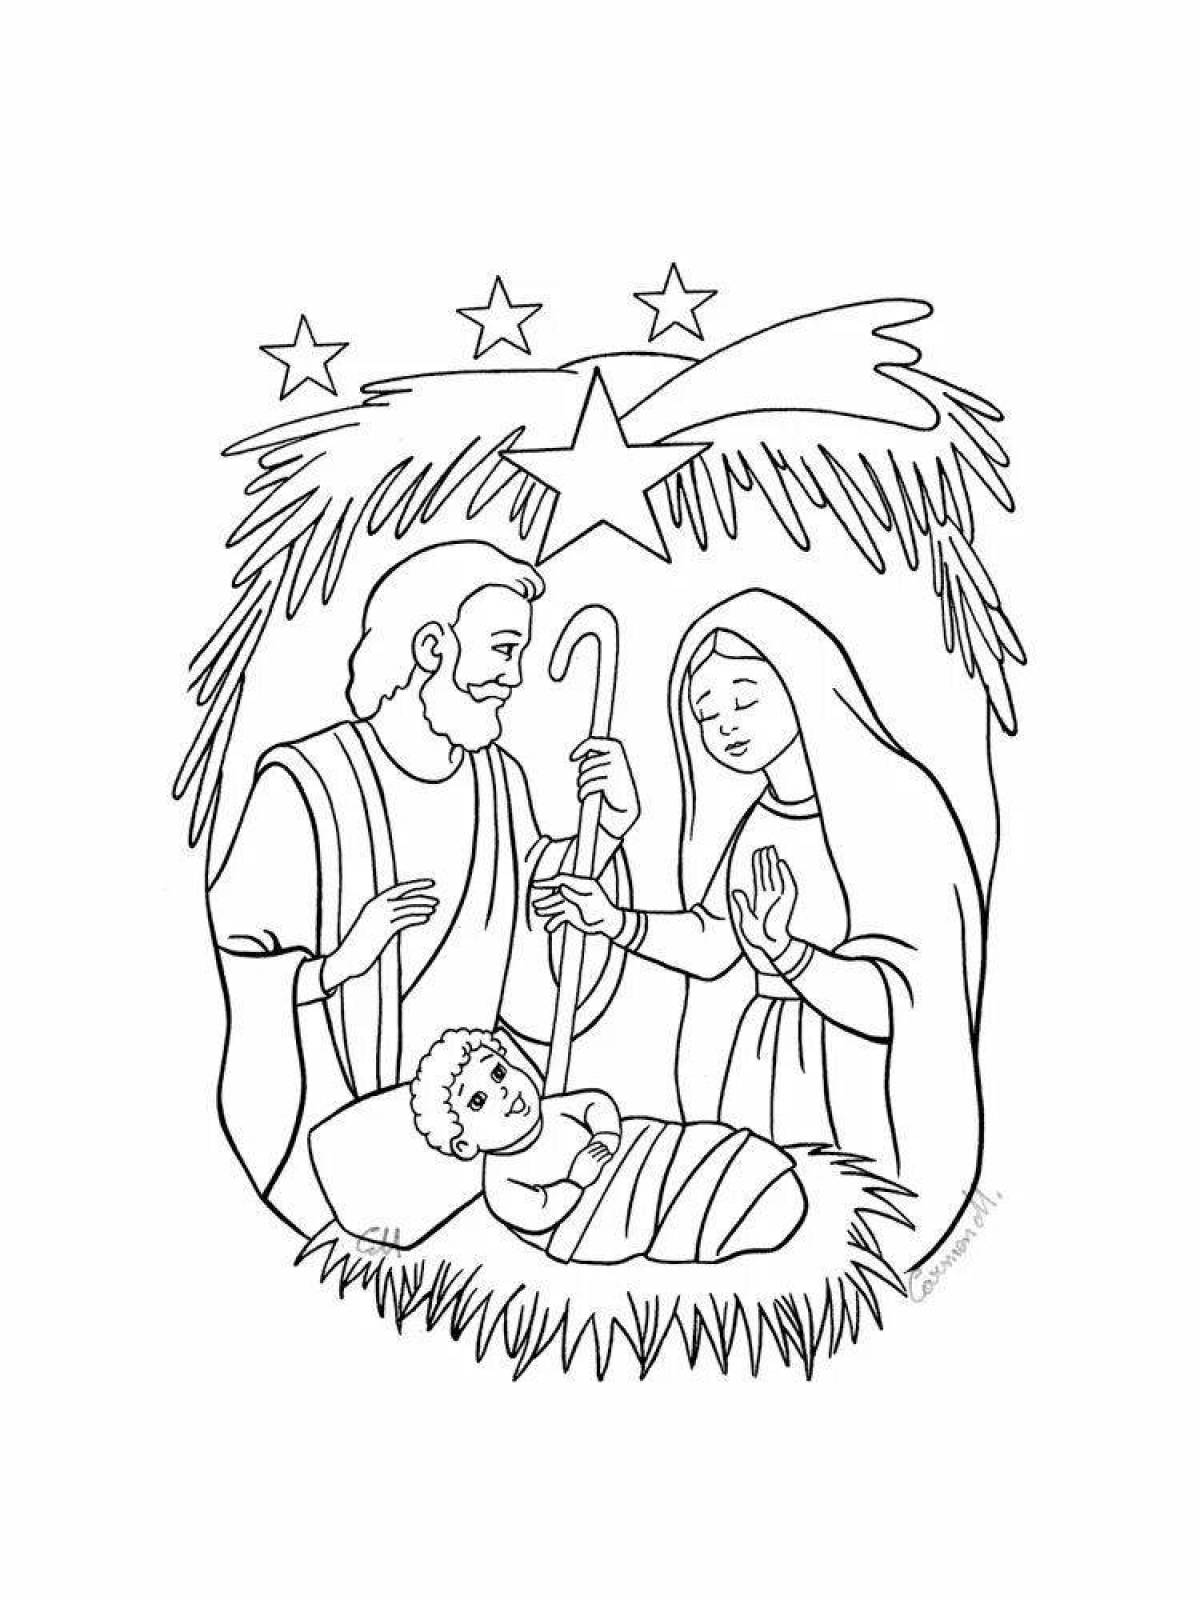 Exquisite Christmas coloring book for 6-7 year olds